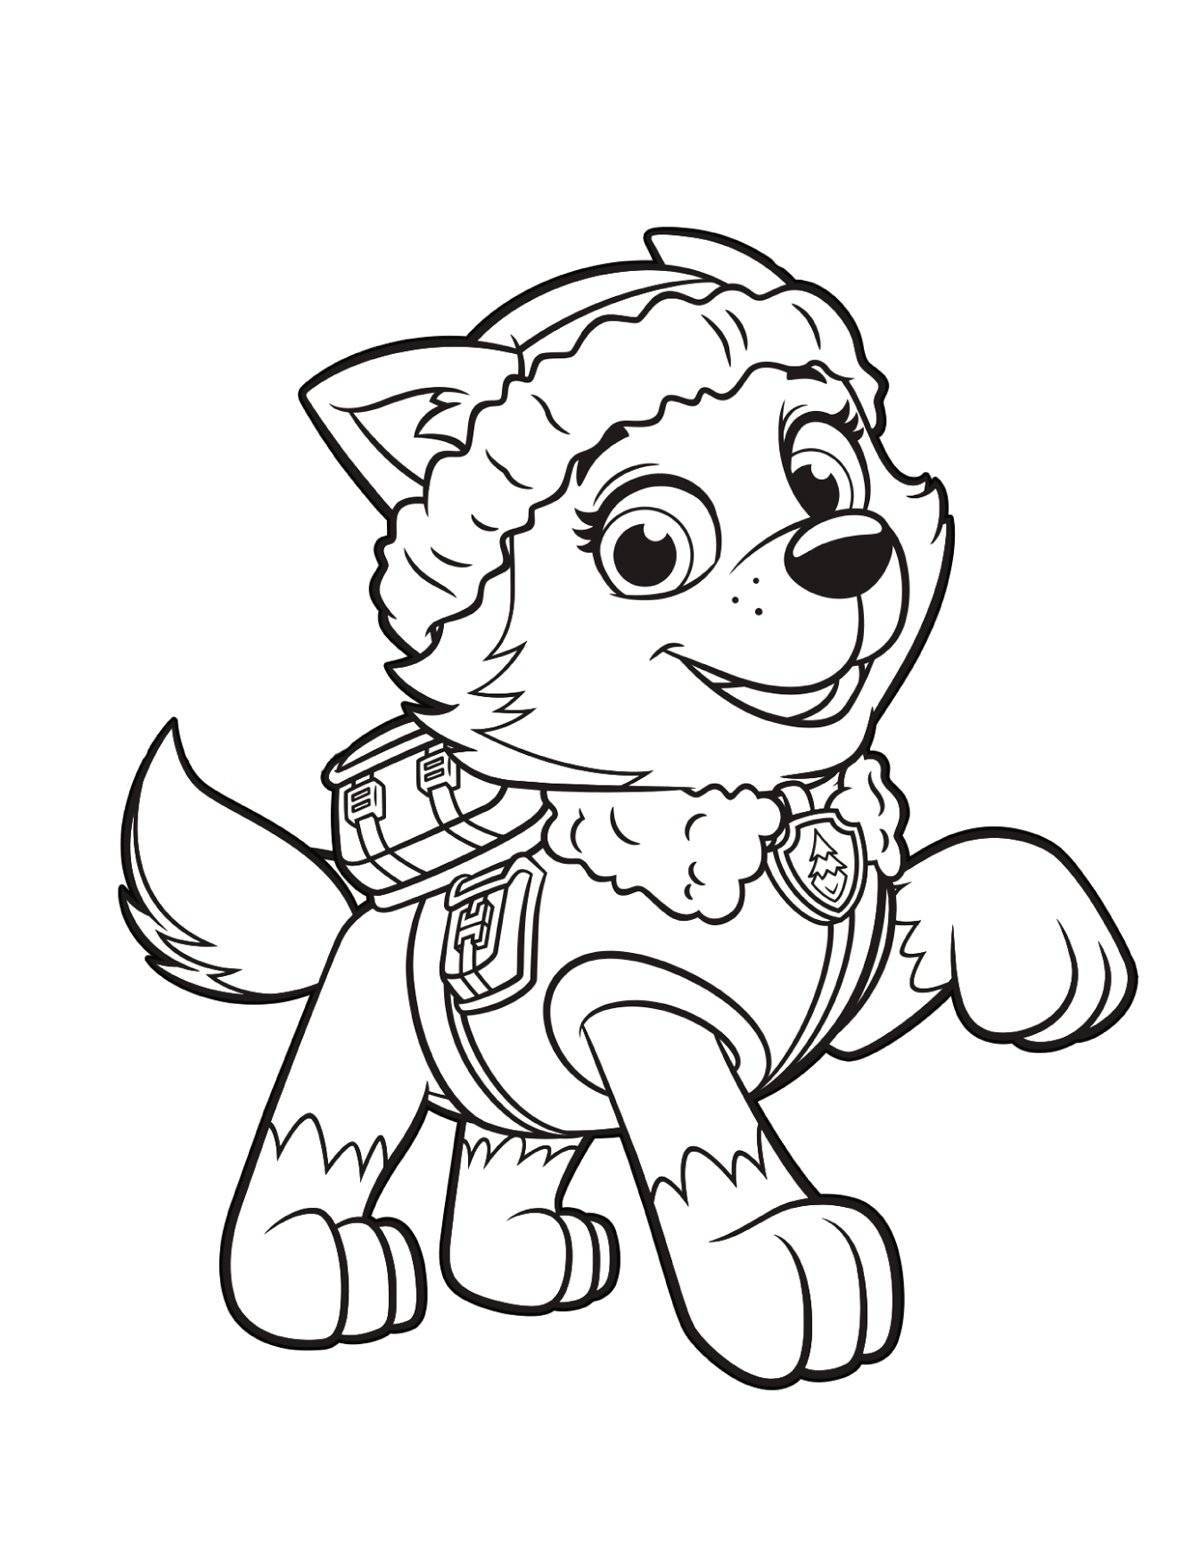 Inspirational Paw Patrol Coloring Page for Girls